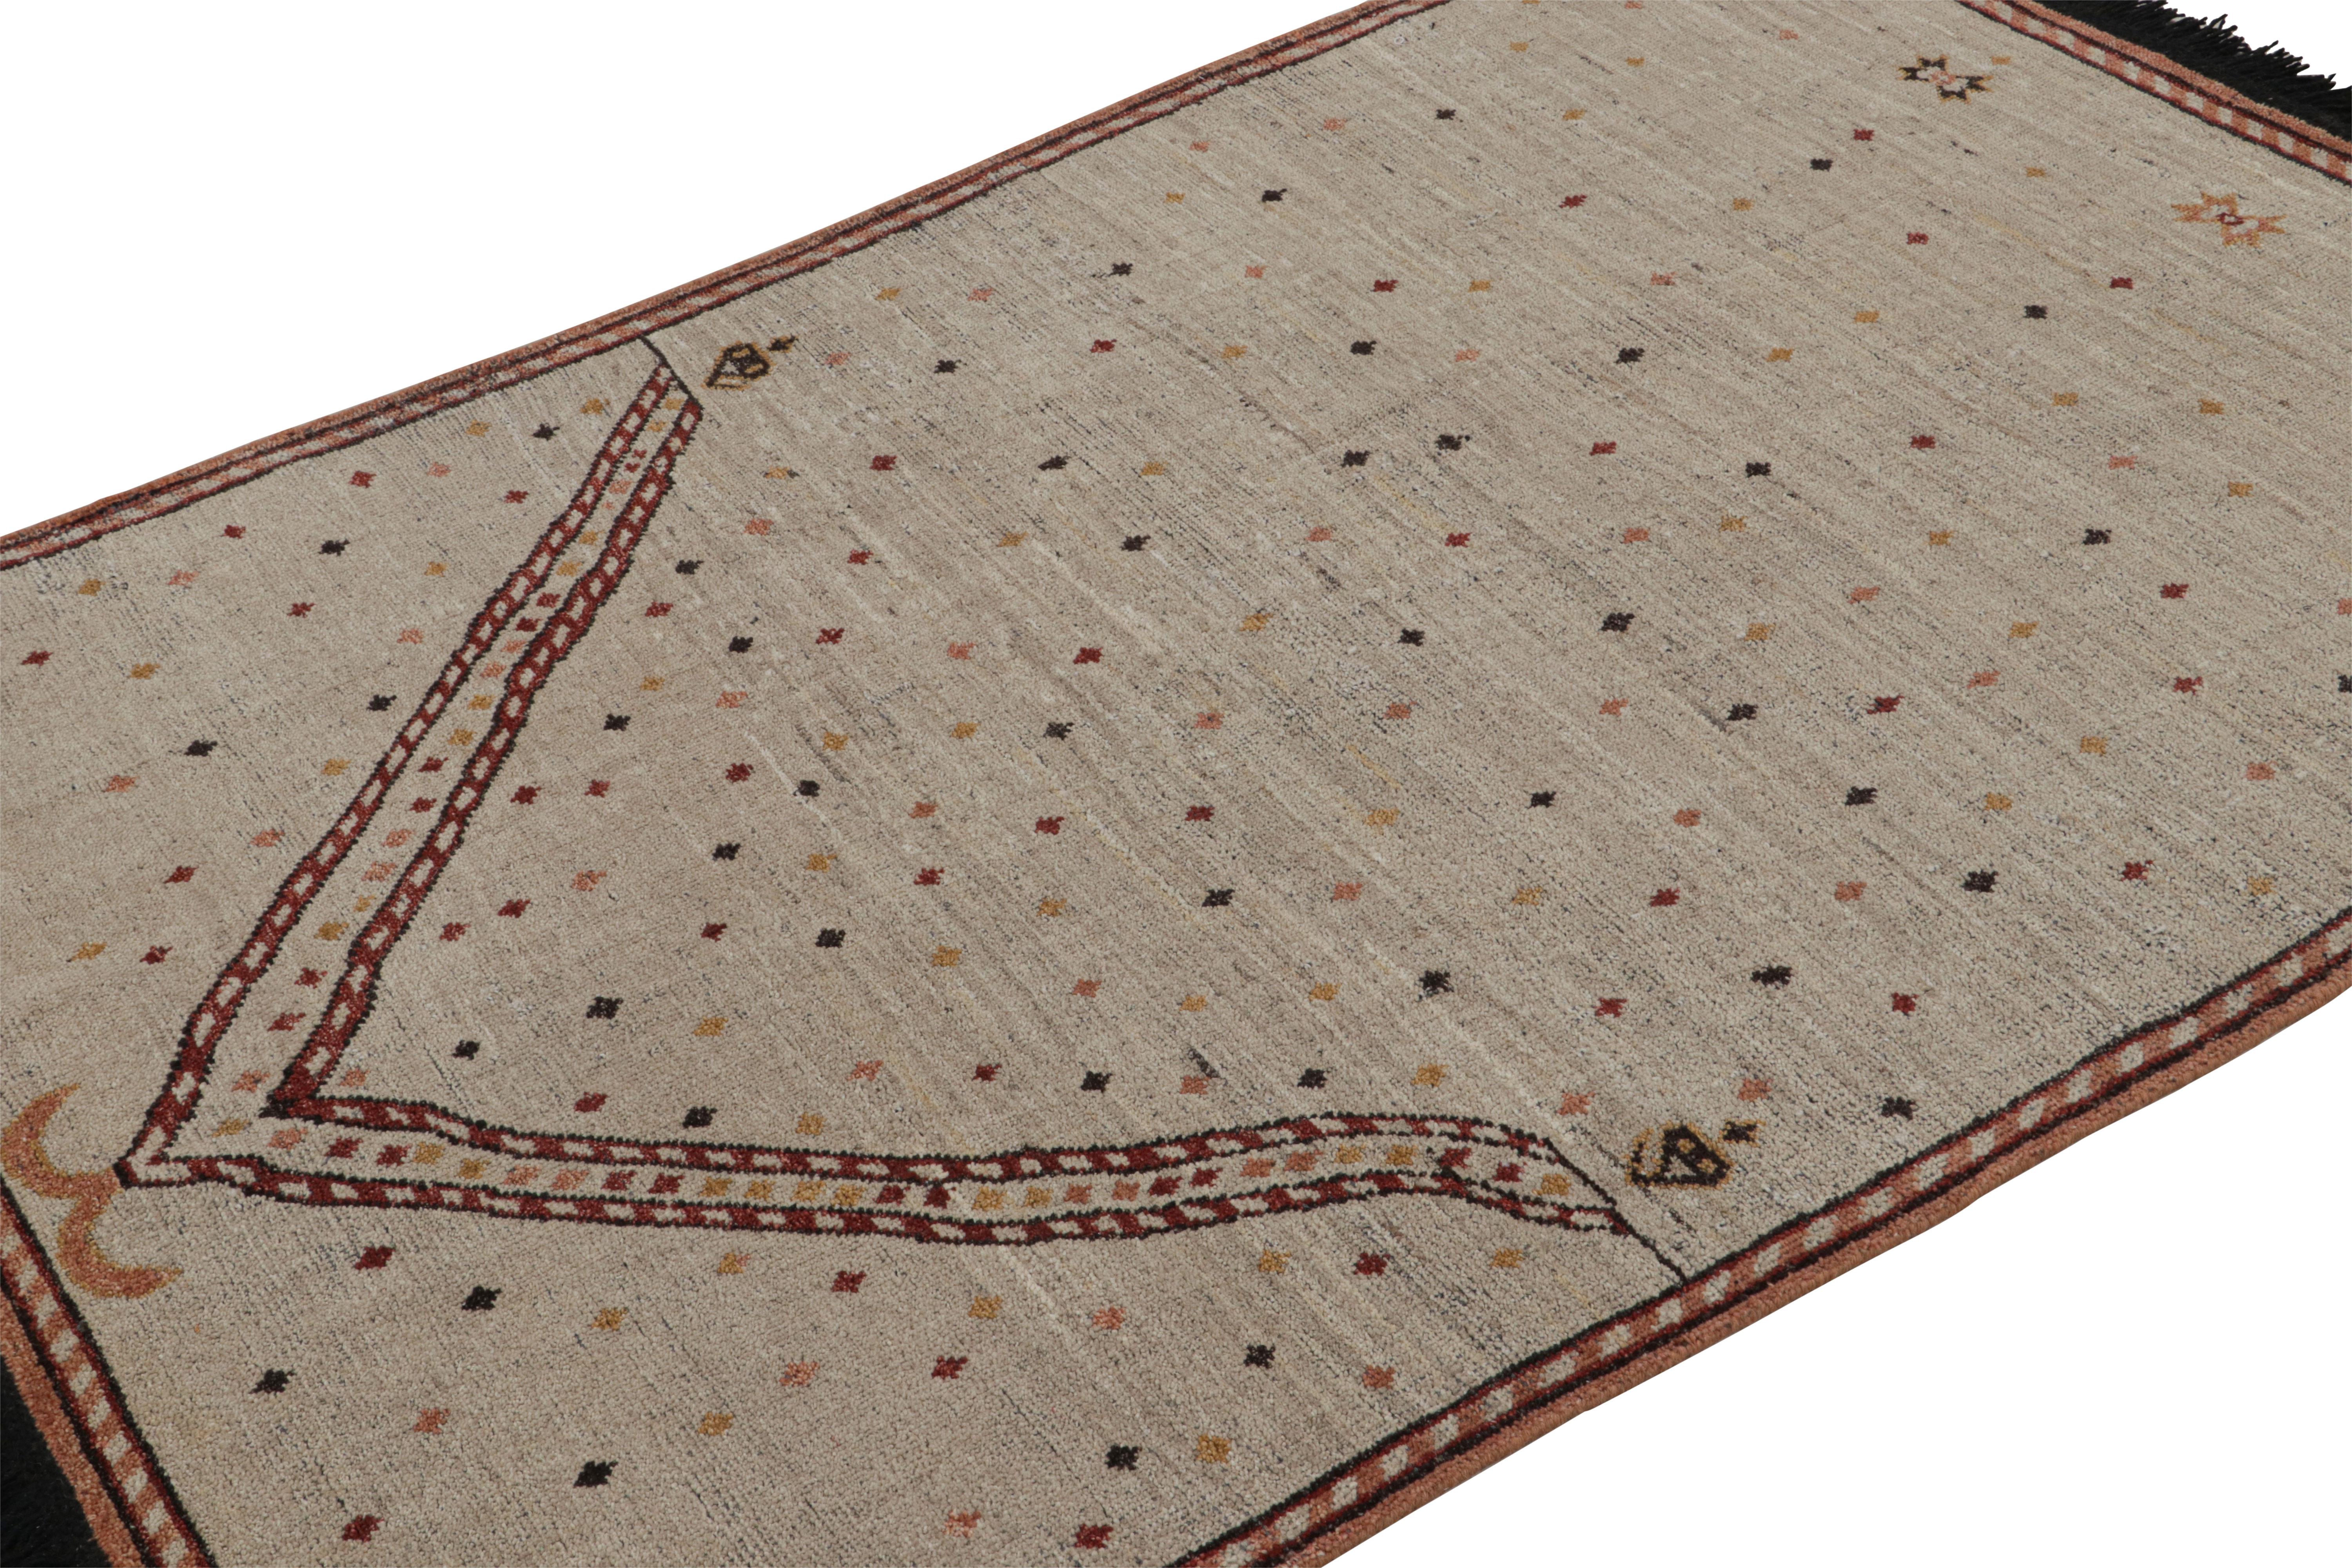 As inspired by Mihrab rugs or prayer rugs with this “gateway” geometric pattern, this 4x6 modern architectural rug from our Burano collection is hand knotted in Ghazni wool. 

On the Design: 

Hand-knotted in the softest quality wool, this rug joins